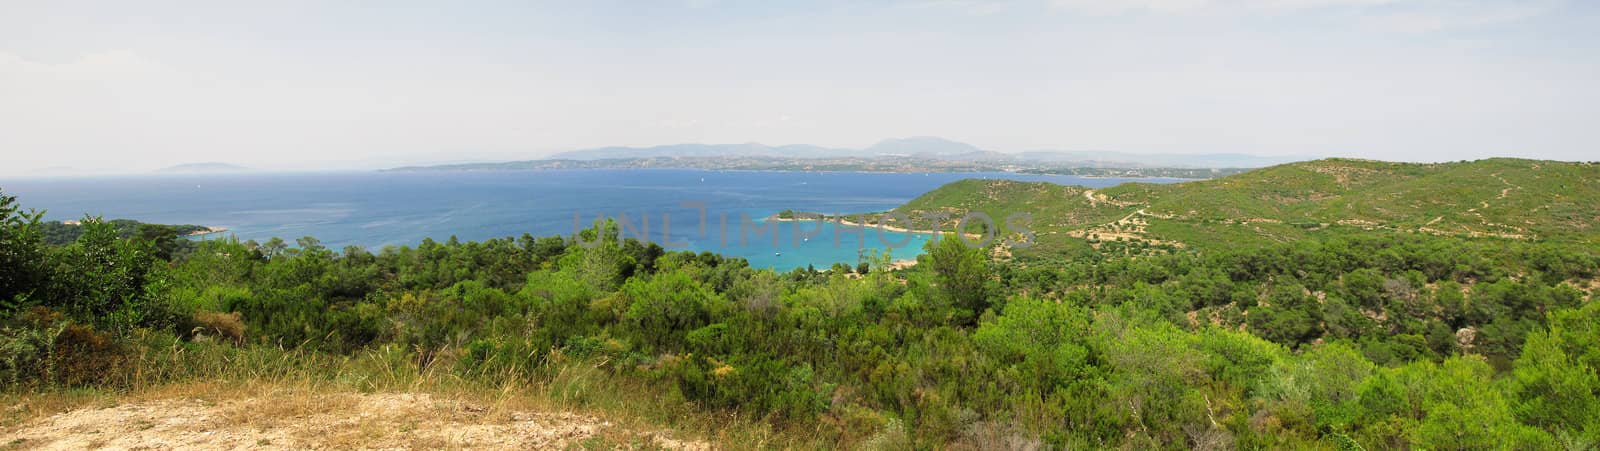 Panorama mountains and sea Greece by Arrxxx